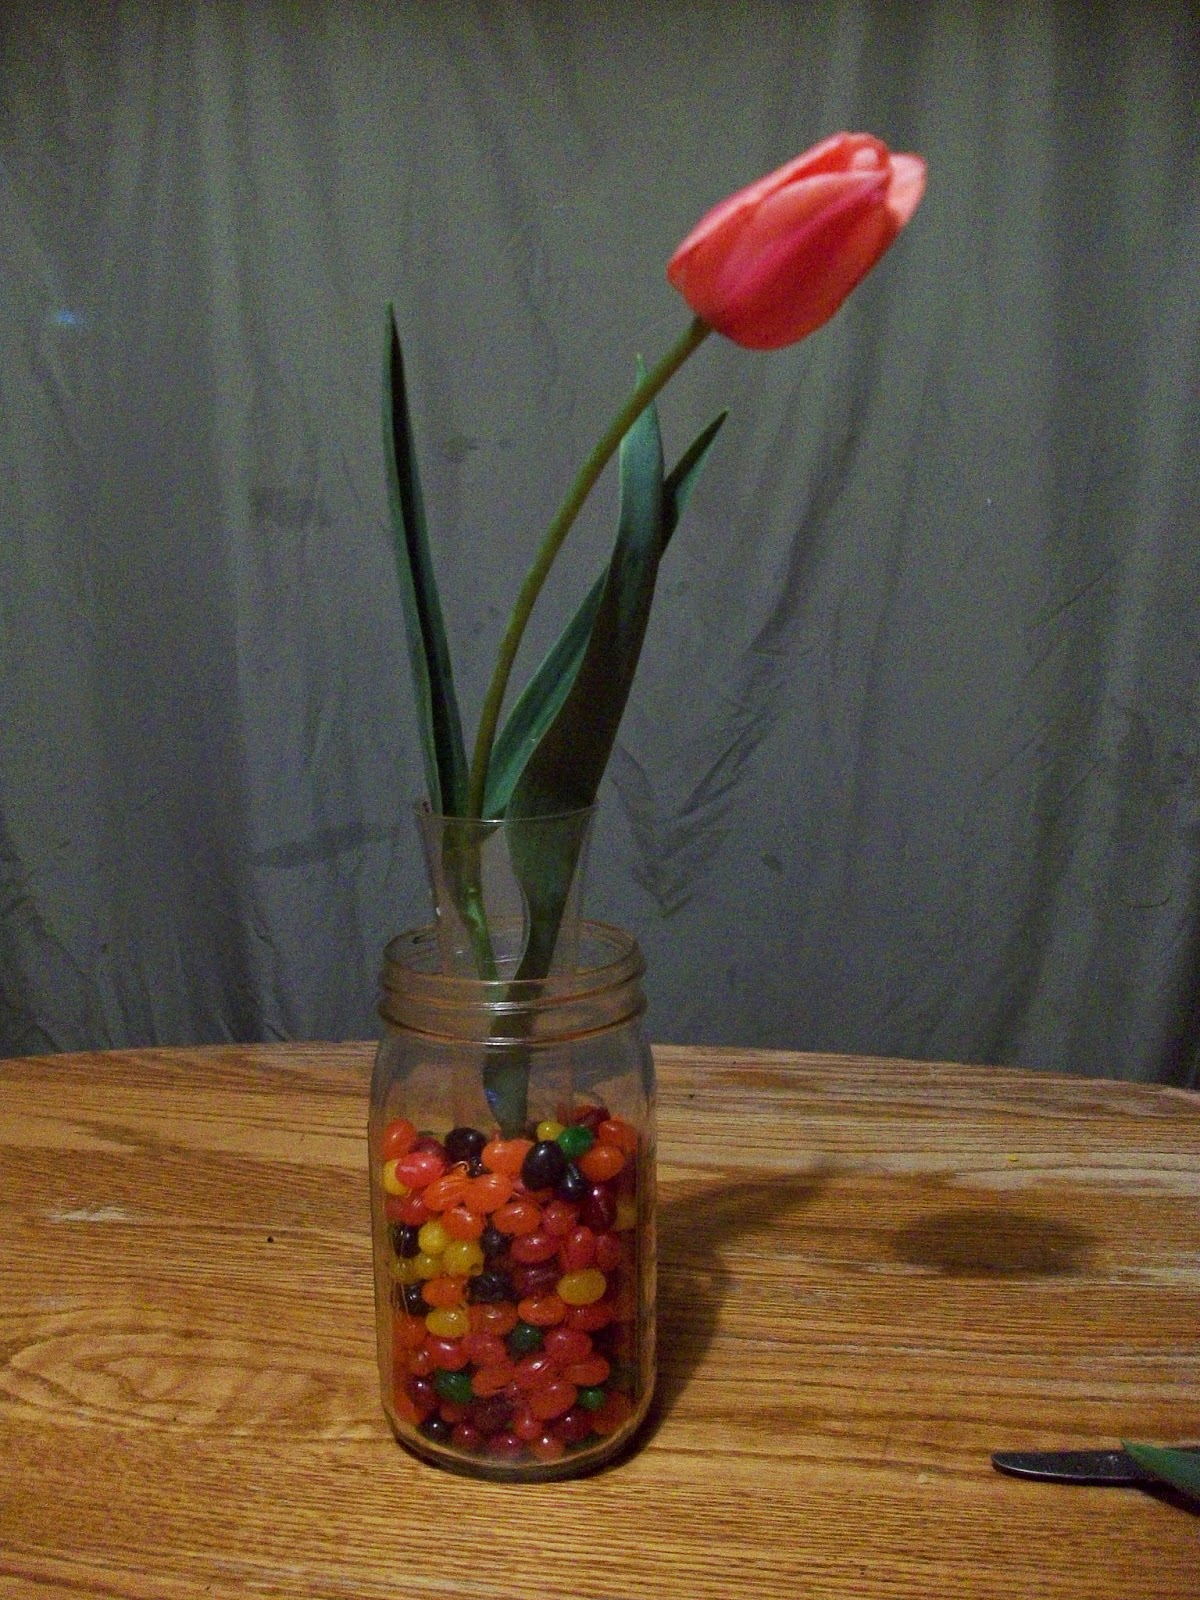 flower pot stand ideas tried placing it in a variety of candy. | 1200 x 1600